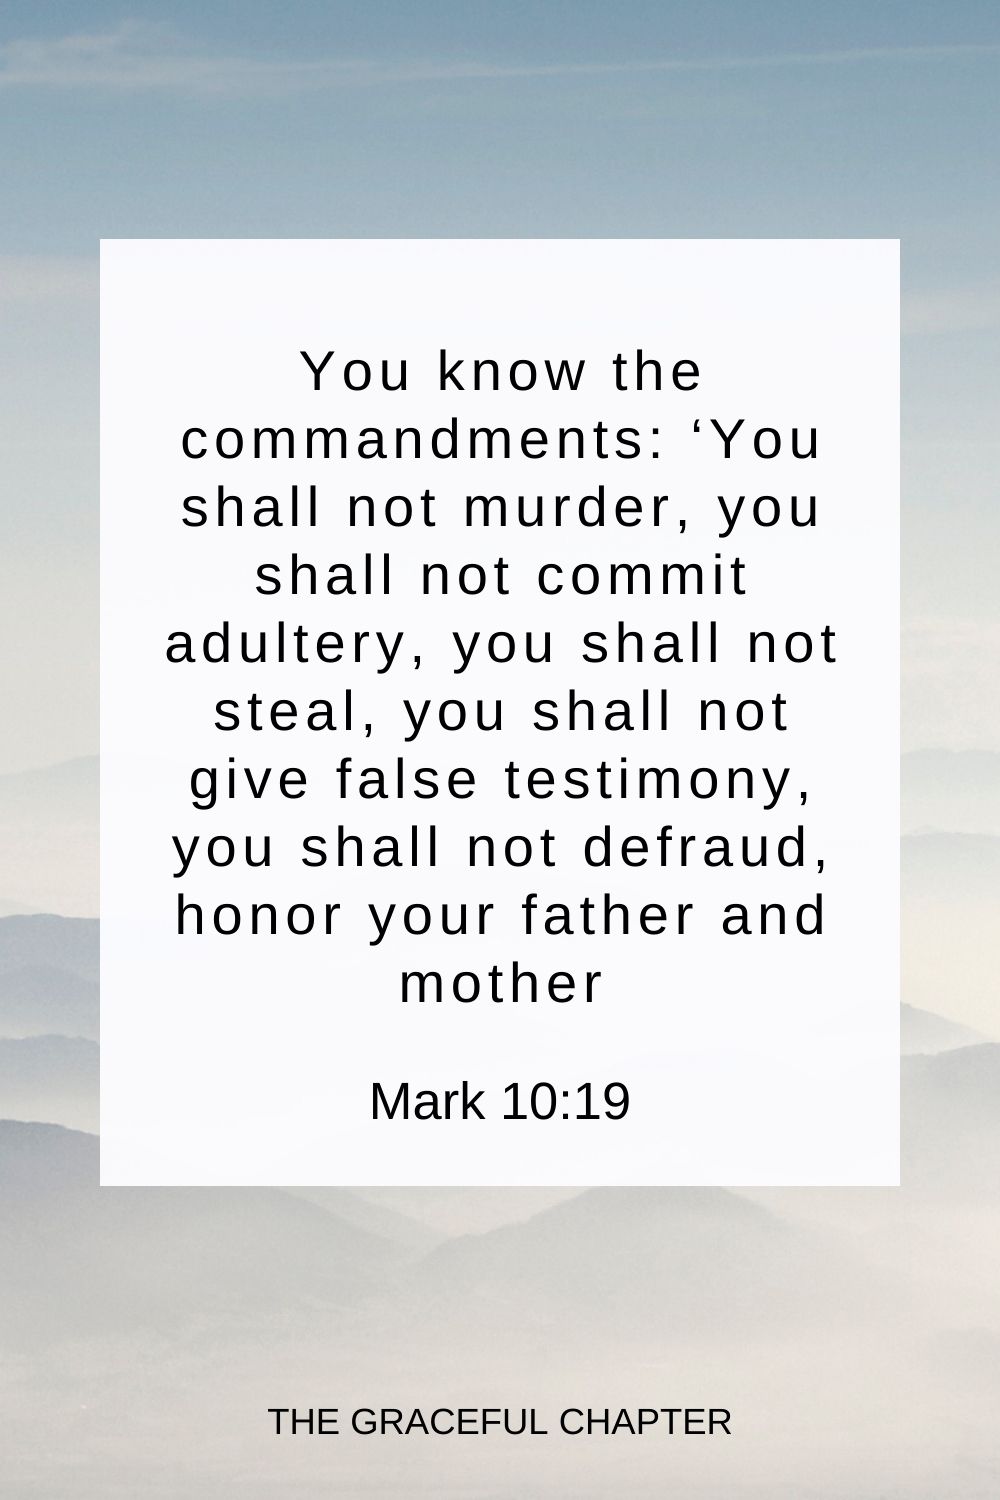 You know the commandments: ‘You shall not murder, you shall not commit adultery, you shall not steal, you shall not give false testimony, you shall not defraud, honor your father and mother Mark 10:19